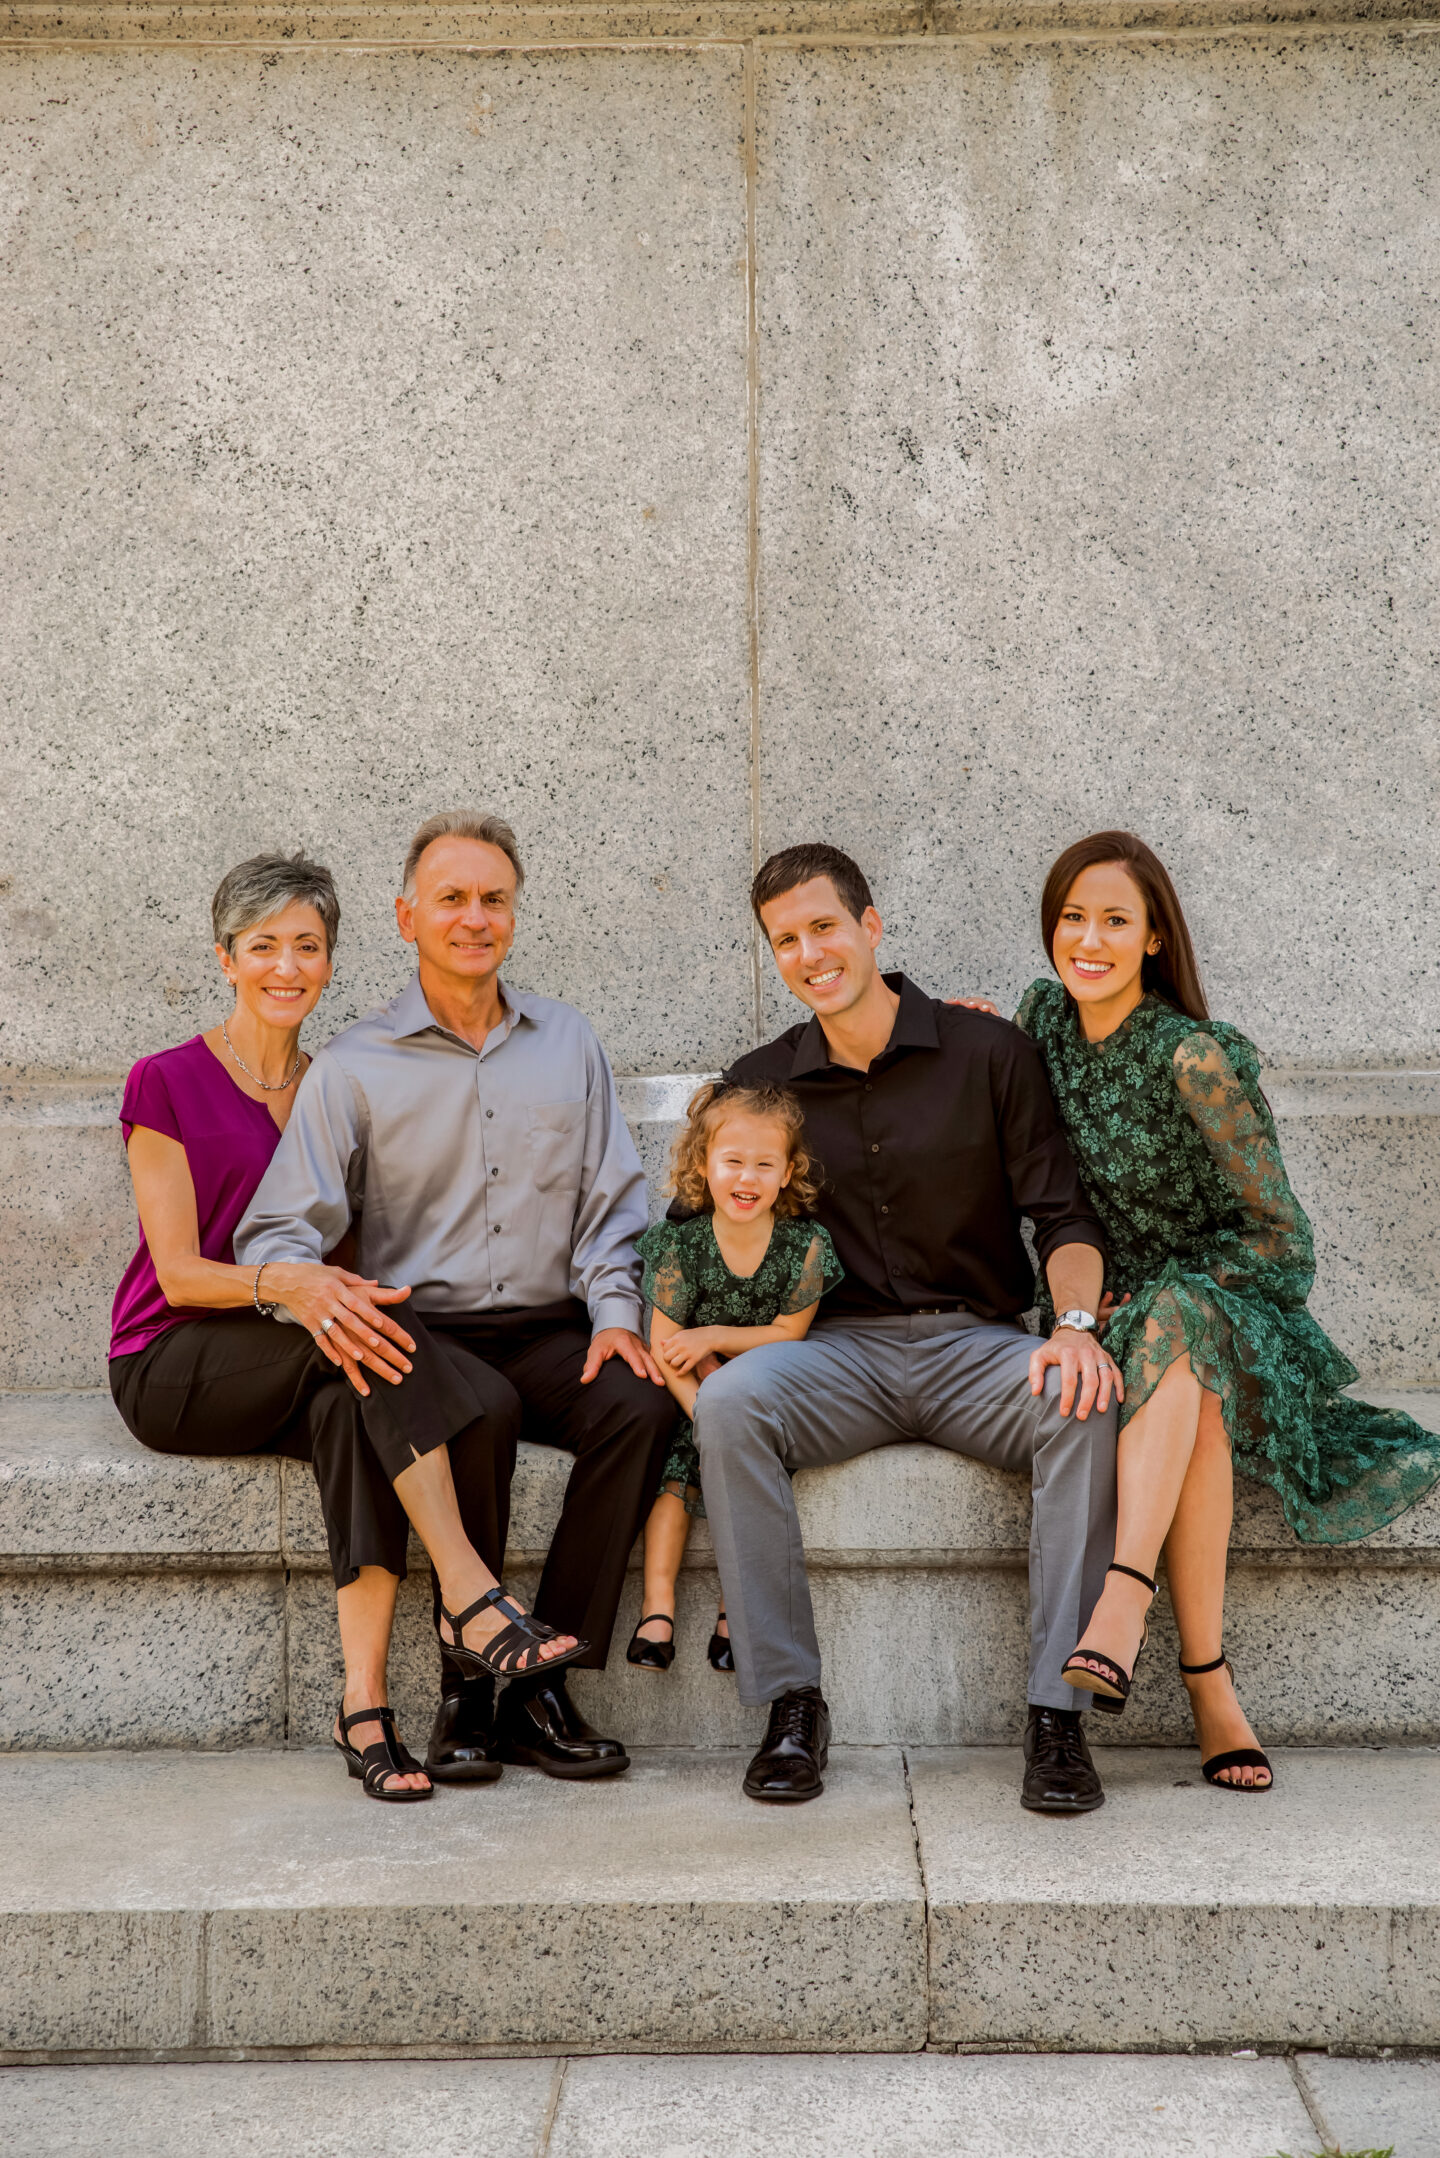 Our 2021 FAMILY PHOTOS - with a Shoott PROMO CODE for 10% off your own photoshoot!